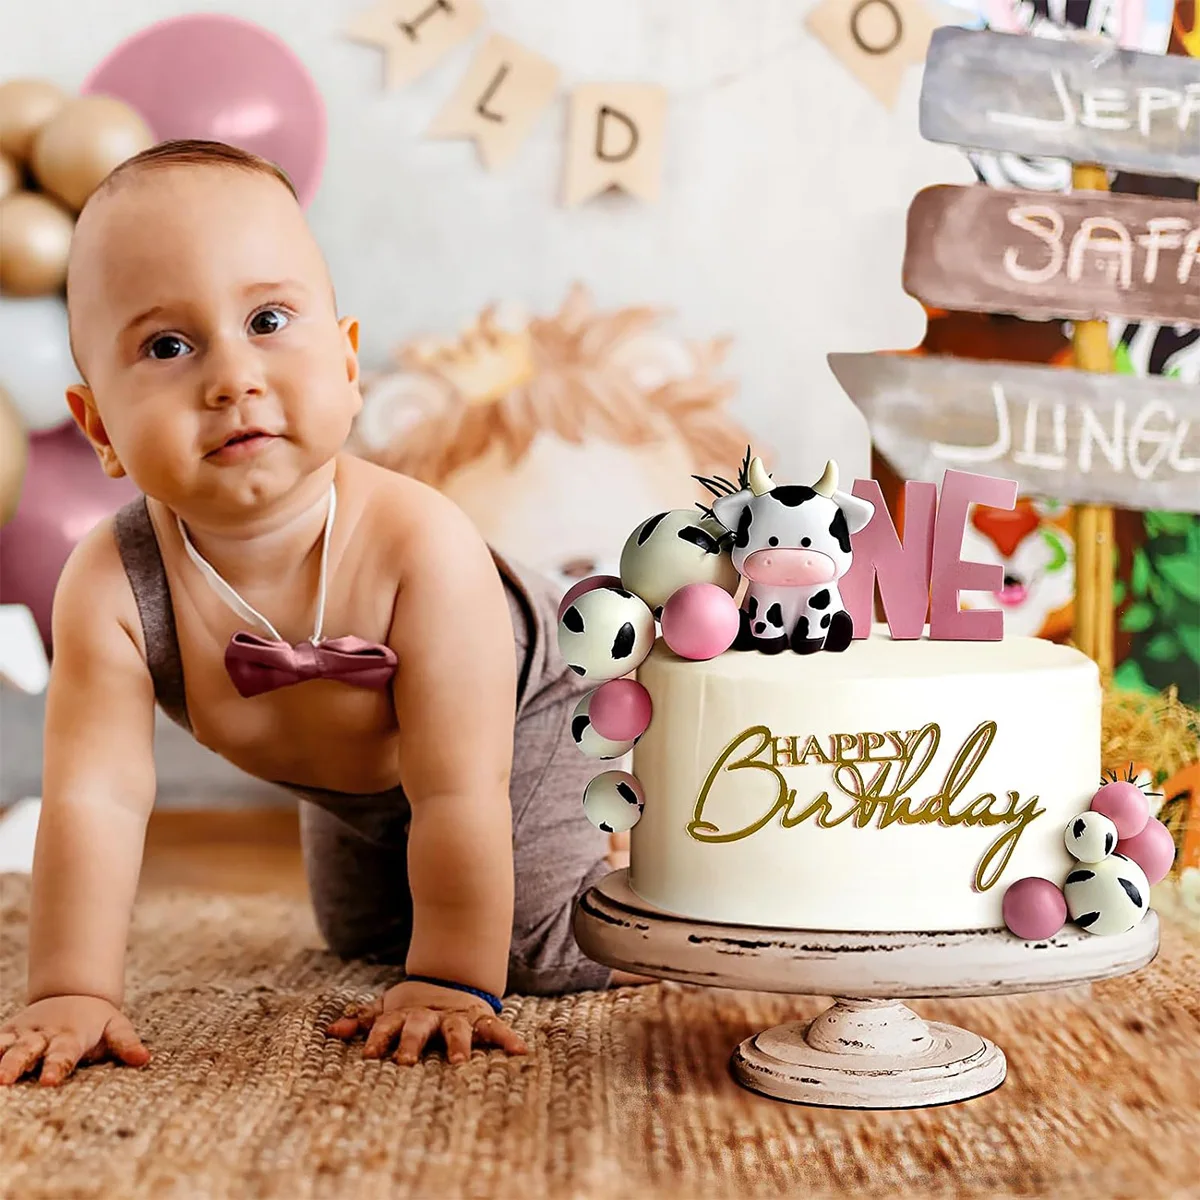 https://ae01.alicdn.com/kf/S51dd0fc1c7da43dea2f5841e2f51b5aei/13Pcs-Cow-Cake-Toppers-Foam-Balls-Cake-Decorations-with-Gold-Happy-Birthday-Topper-for-Baby-Shower.jpg